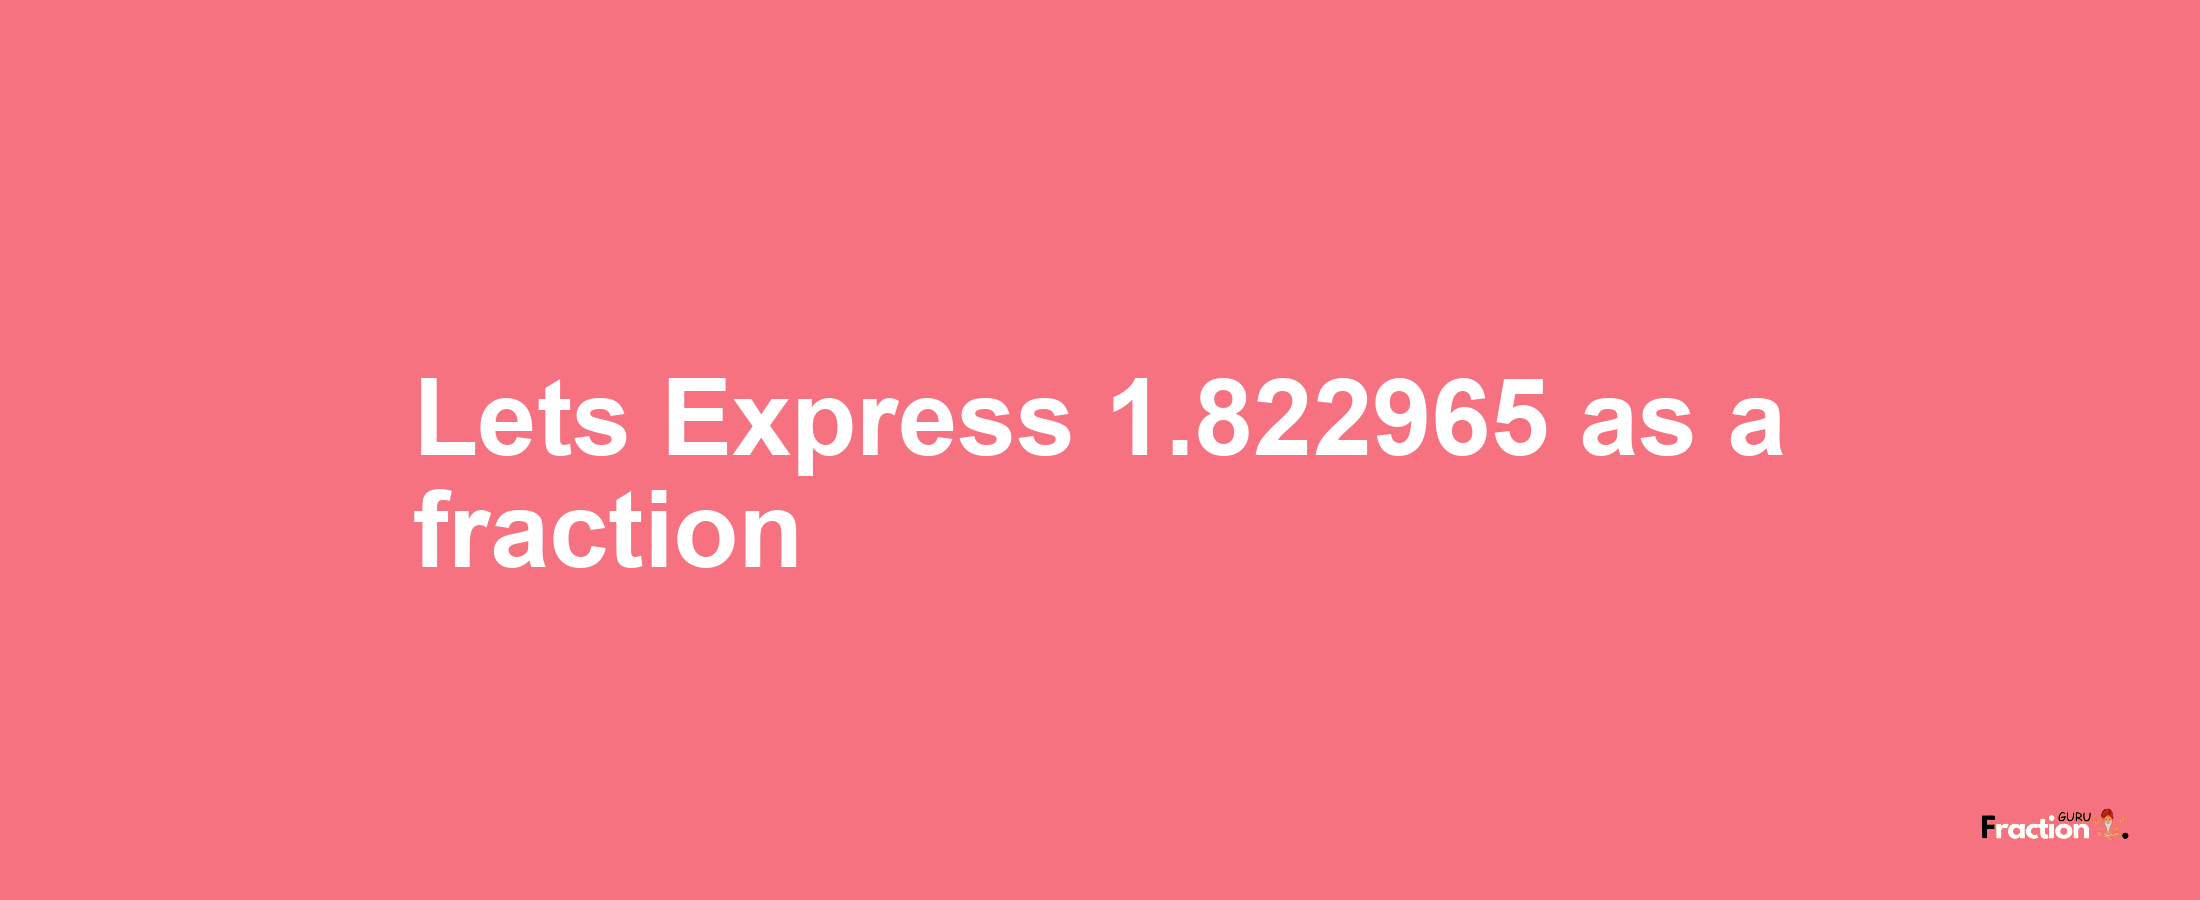 Lets Express 1.822965 as afraction